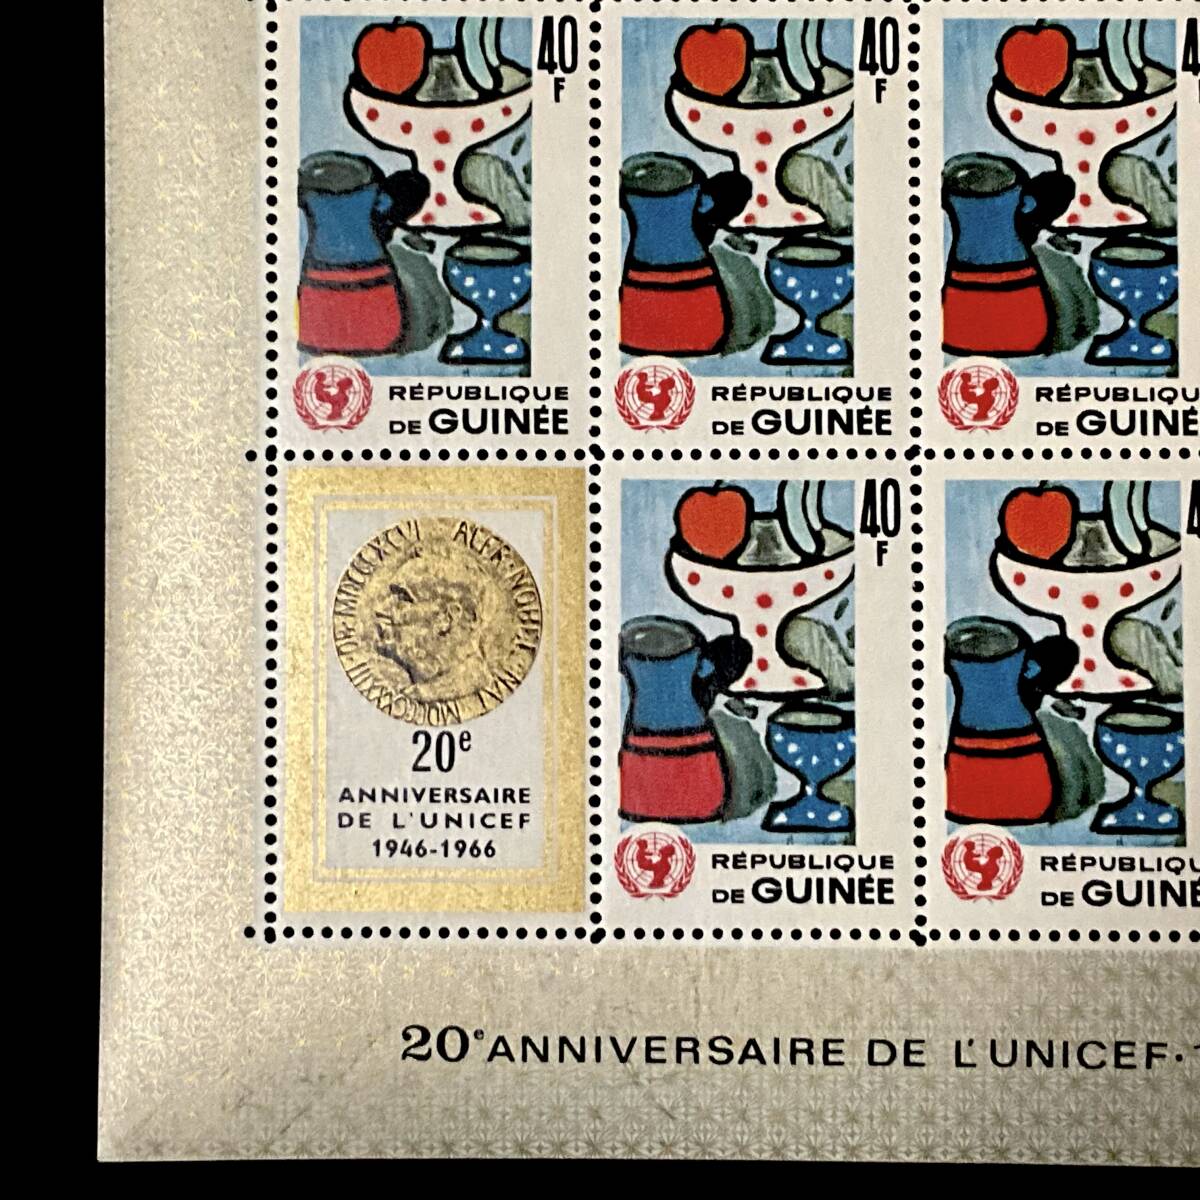 ginia also peace country issue [ fruit stay ru* Uni sef20 anniversary commemoration ] small size seat west Africa 1966 year 12 month 12 day issue unused stamp 